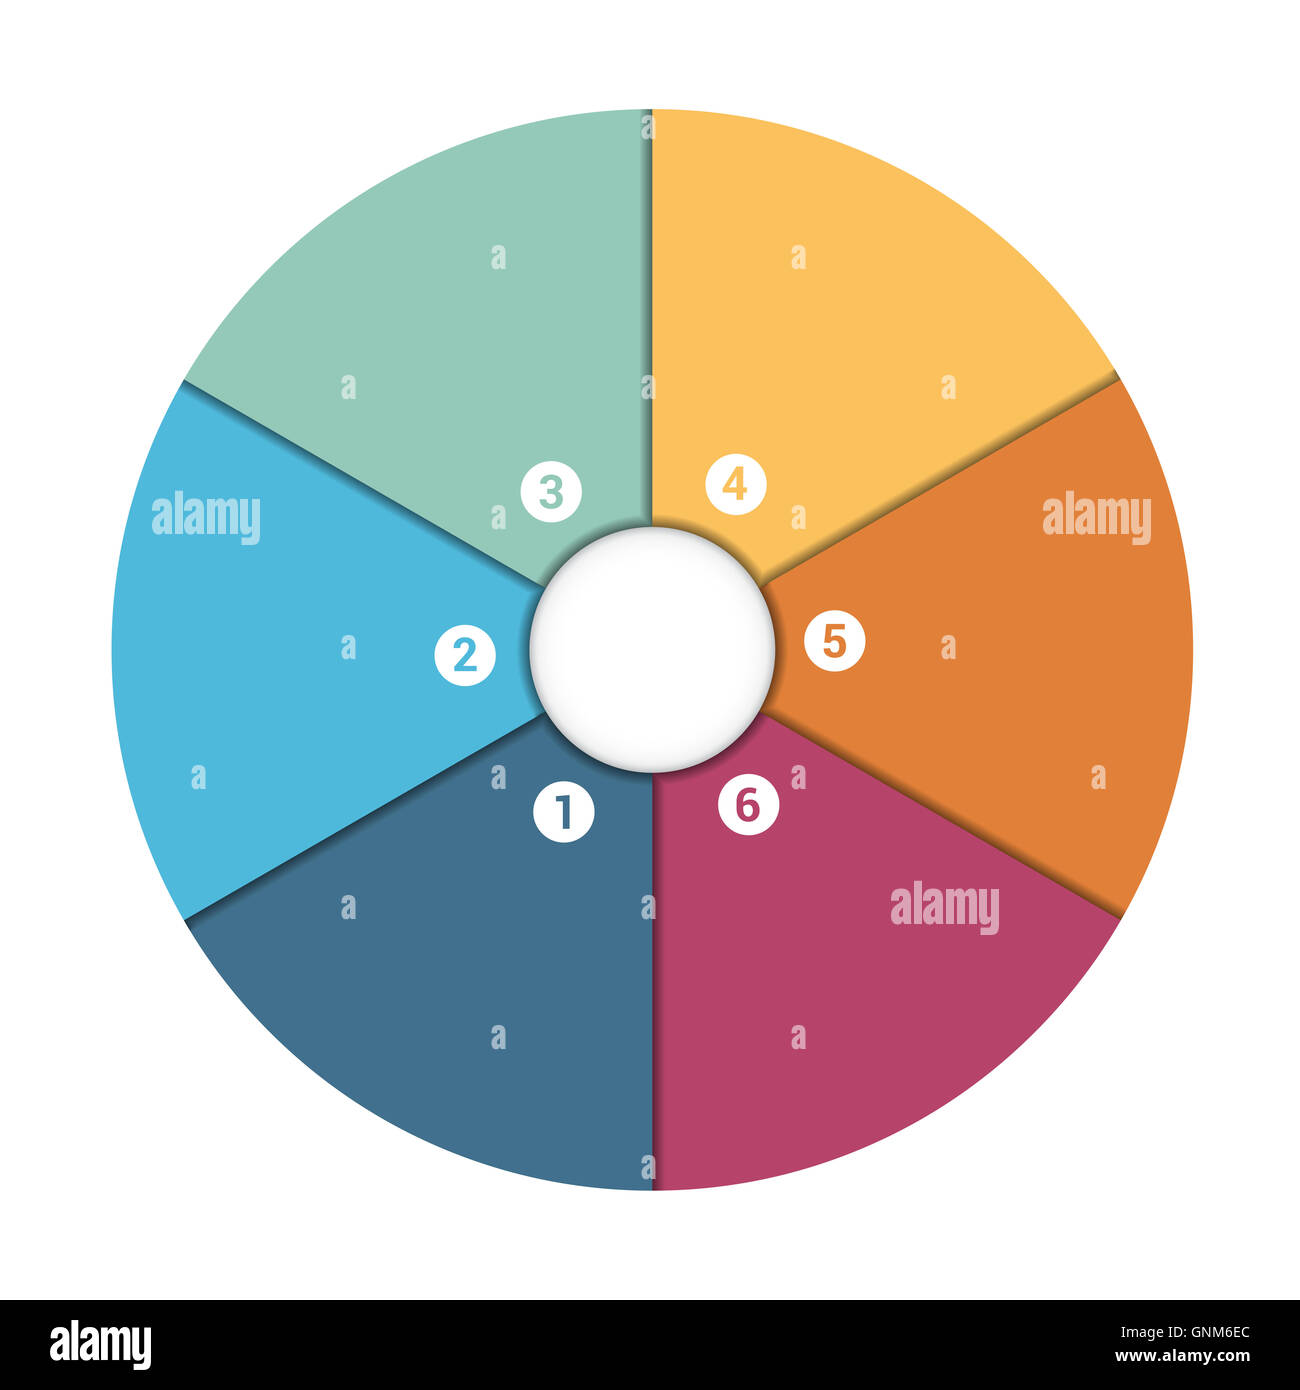 Colourful In The Form Of Flower Petals Around Circle. Template Infographic 6 Position. Pie Chart Stock Photo